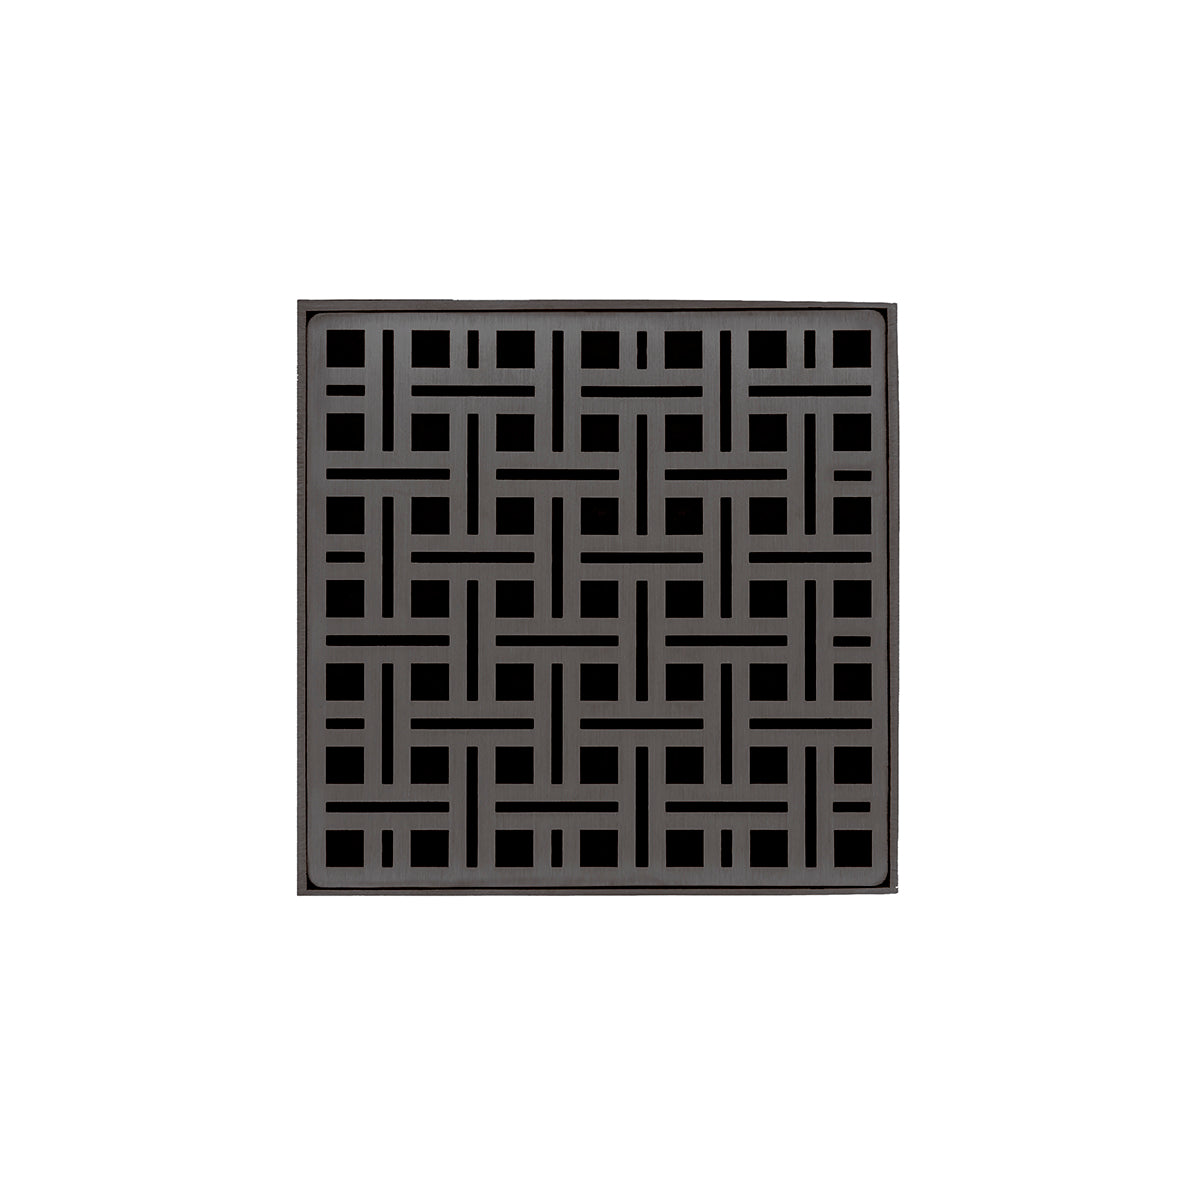 Infinity Drain 5" x 5" VD 5 Premium Center Drain Kit with Weave Pattern Decorative Plate with PVC Drain Body, 2" Outlet